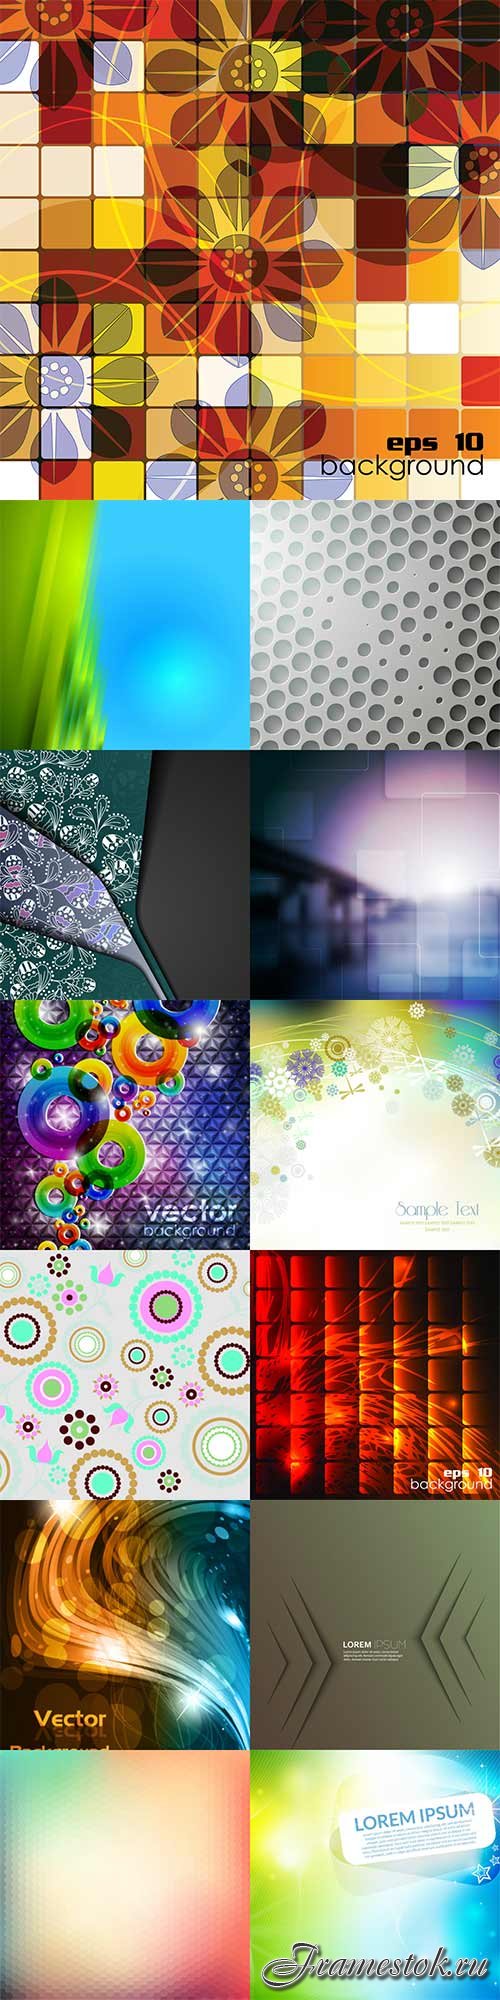 Bright colorful abstract backgrounds vector -58